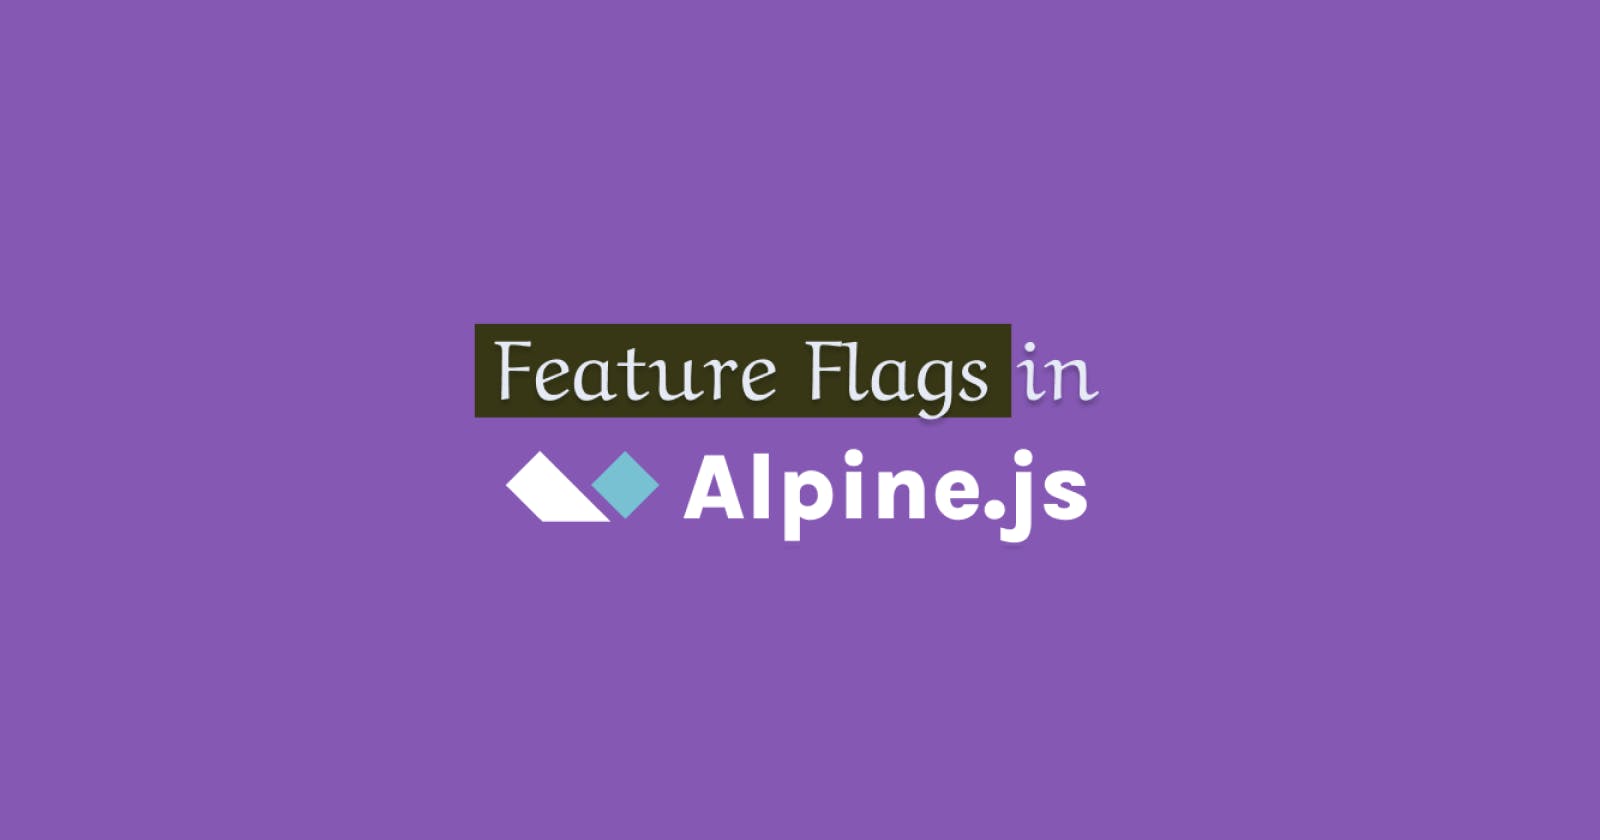 How to use feature flags in an Alpine.js application